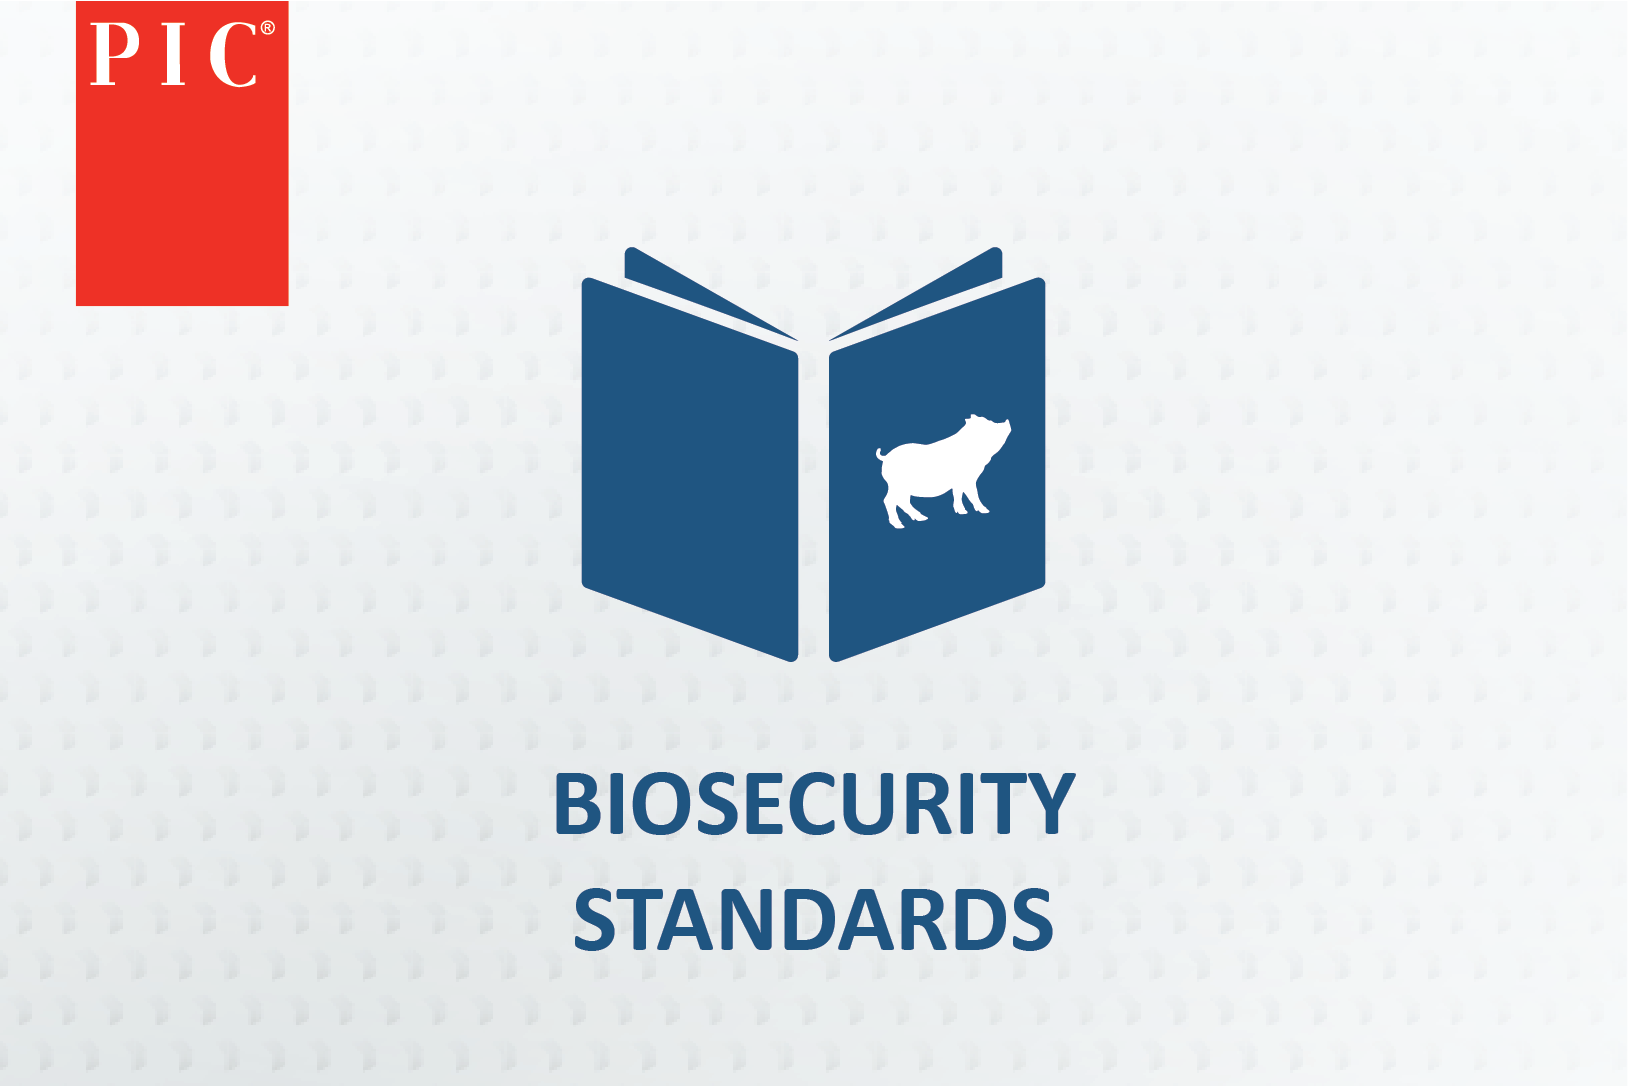 PIC offers biosecurity resources in the manual for pork producers and anyone with pigs.